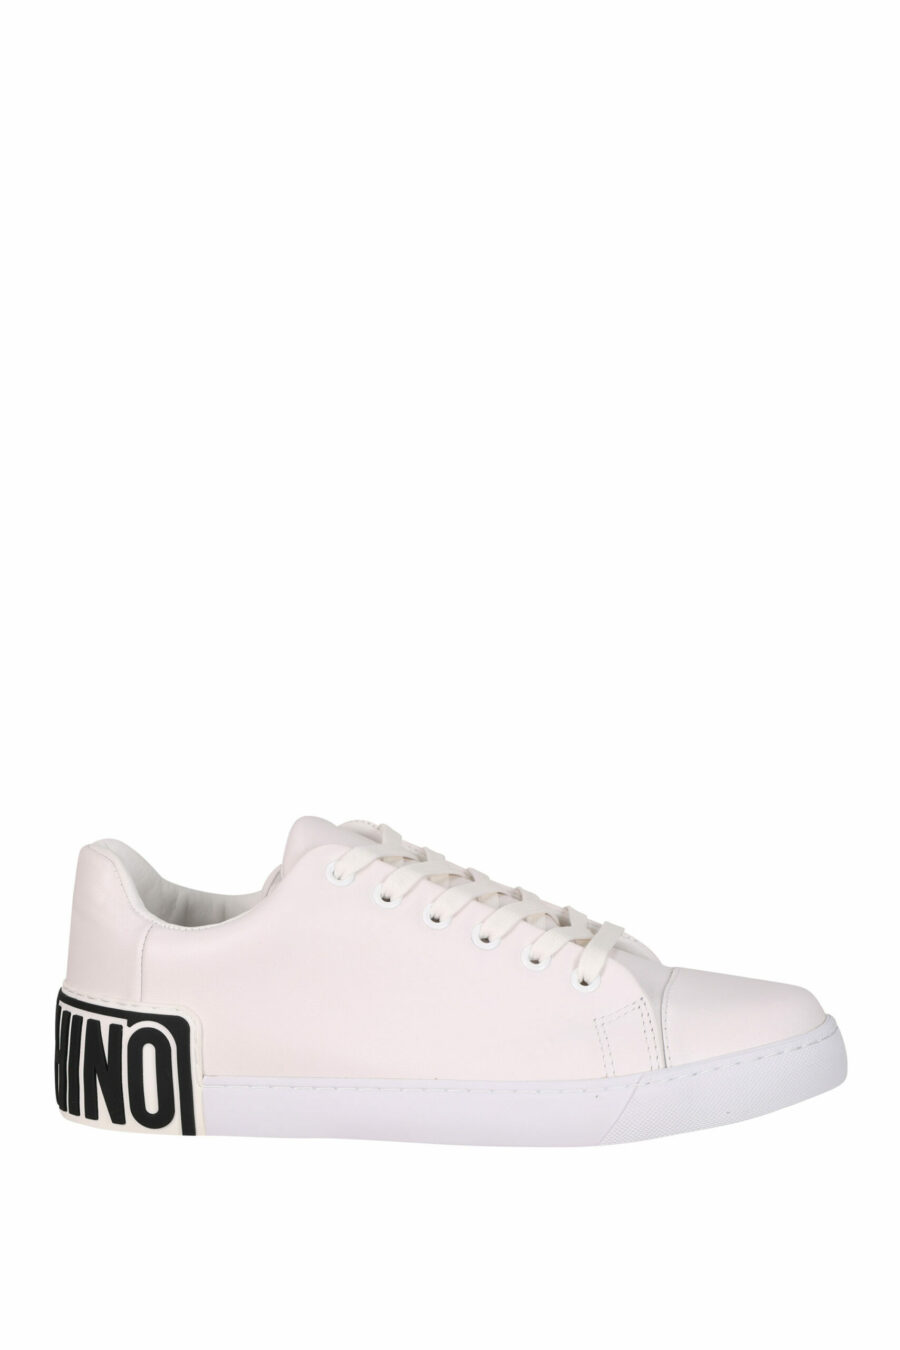 White trainers "vulc25" with black sole and rubber logo on the back - 8054388593519 scaled